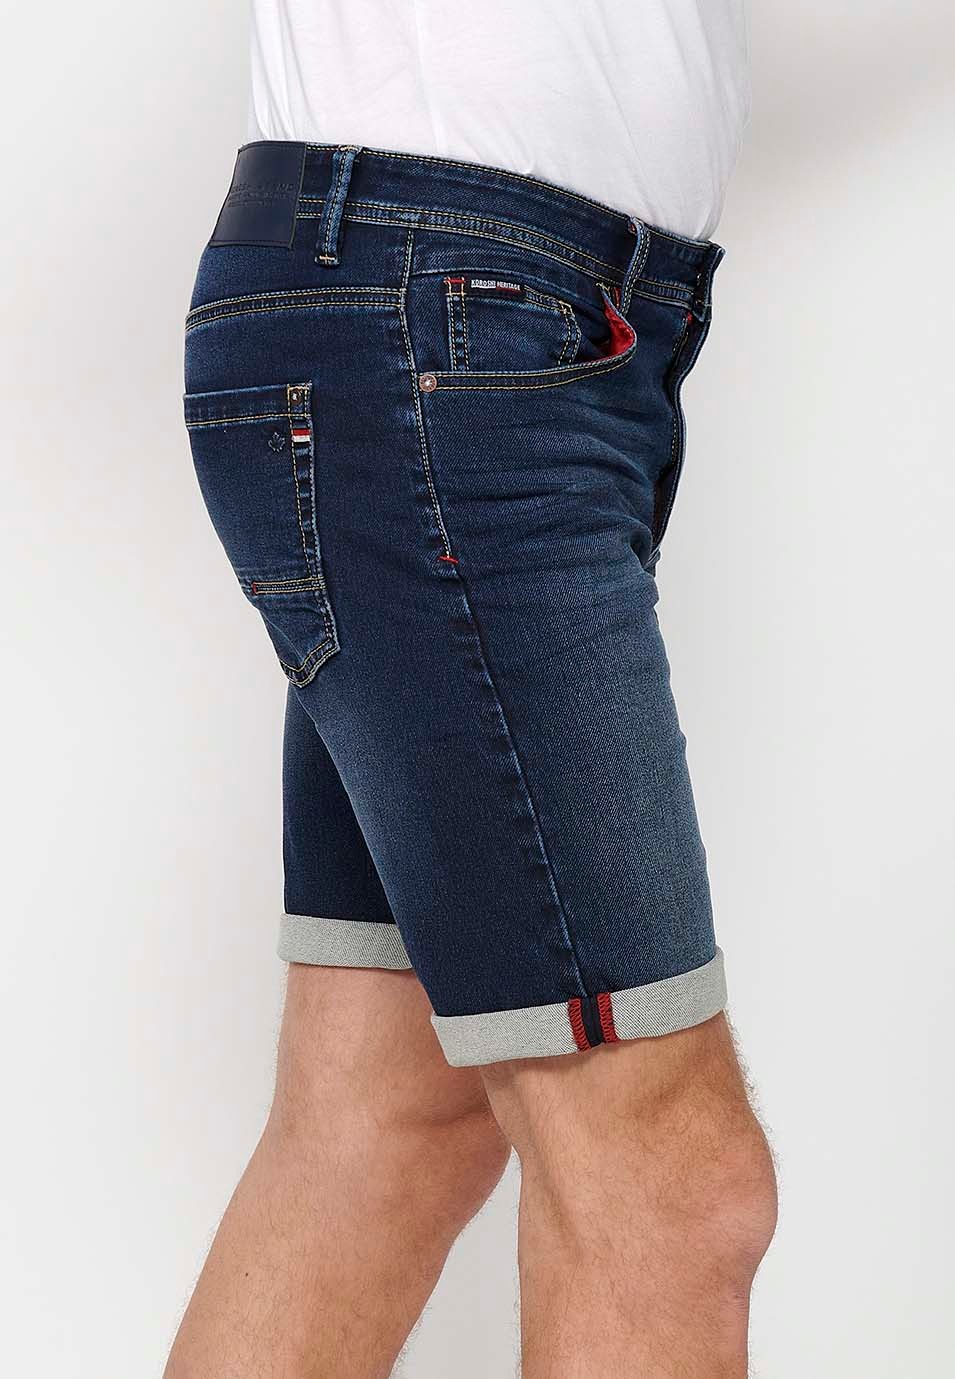 Shorts with turn-up finish with front closure with zipper and button in Blue for Men 3